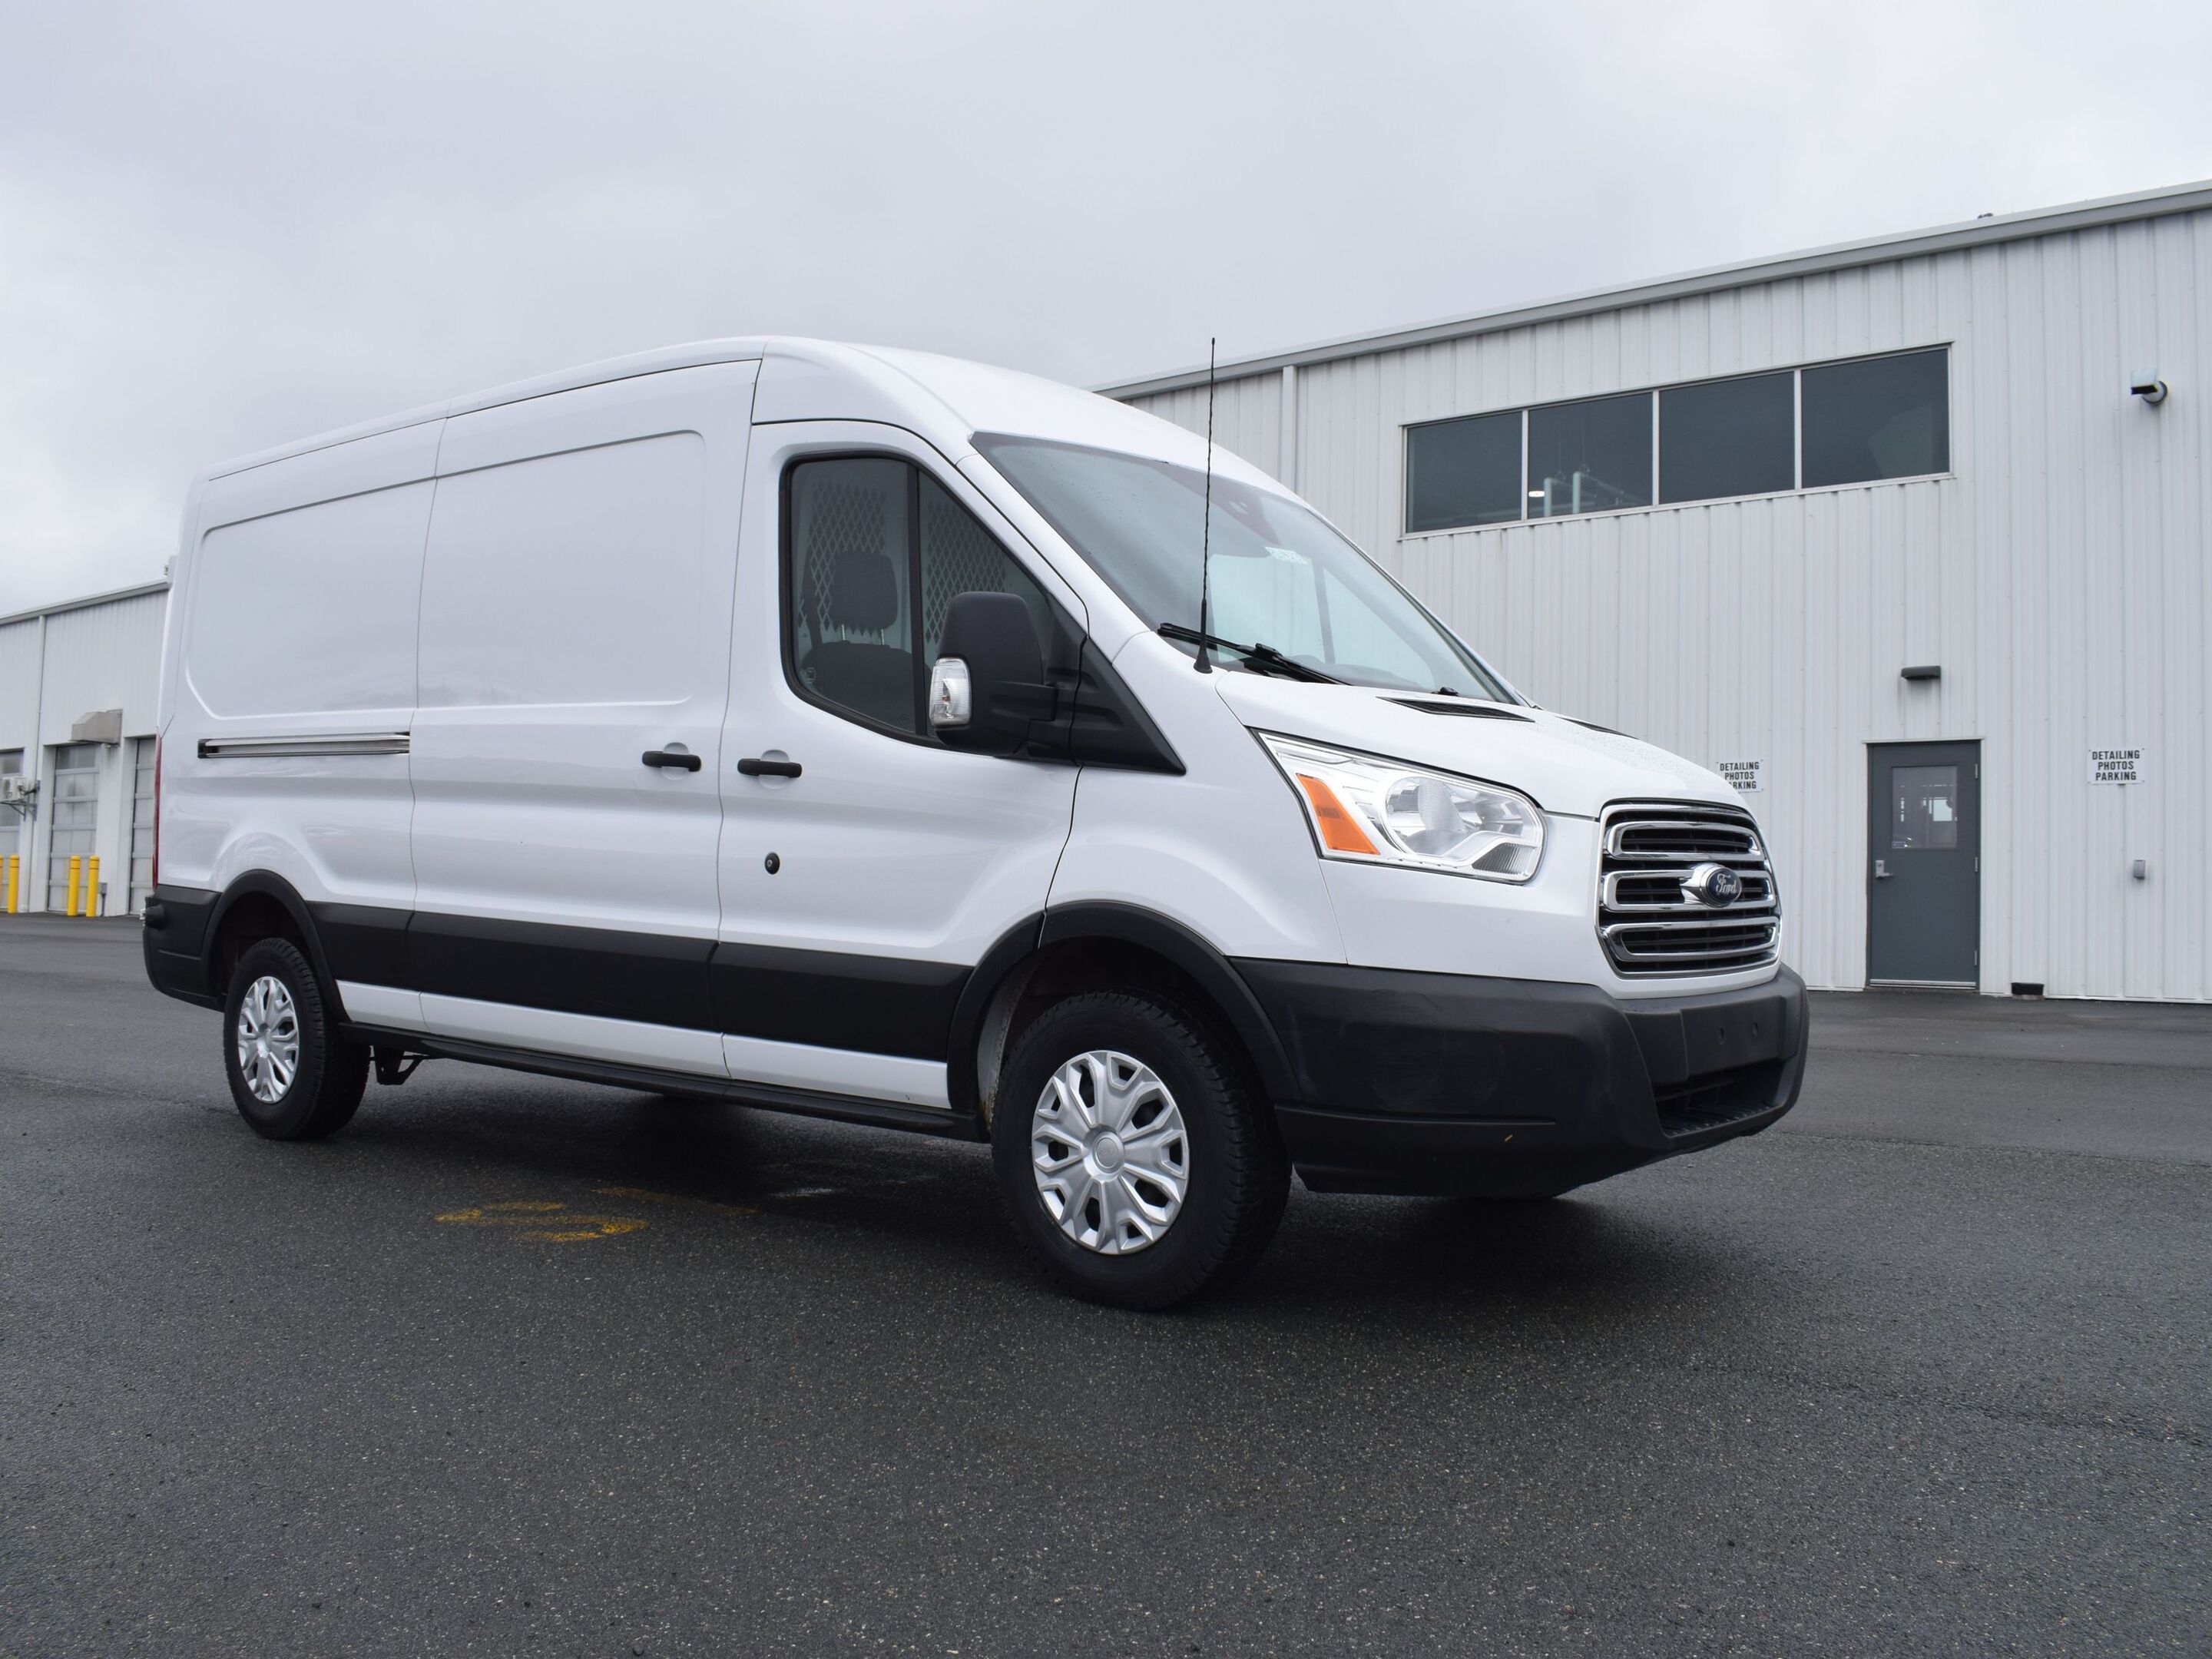 2019 Ford Transit TEXT 902-200-4475 FOR MORE INFO